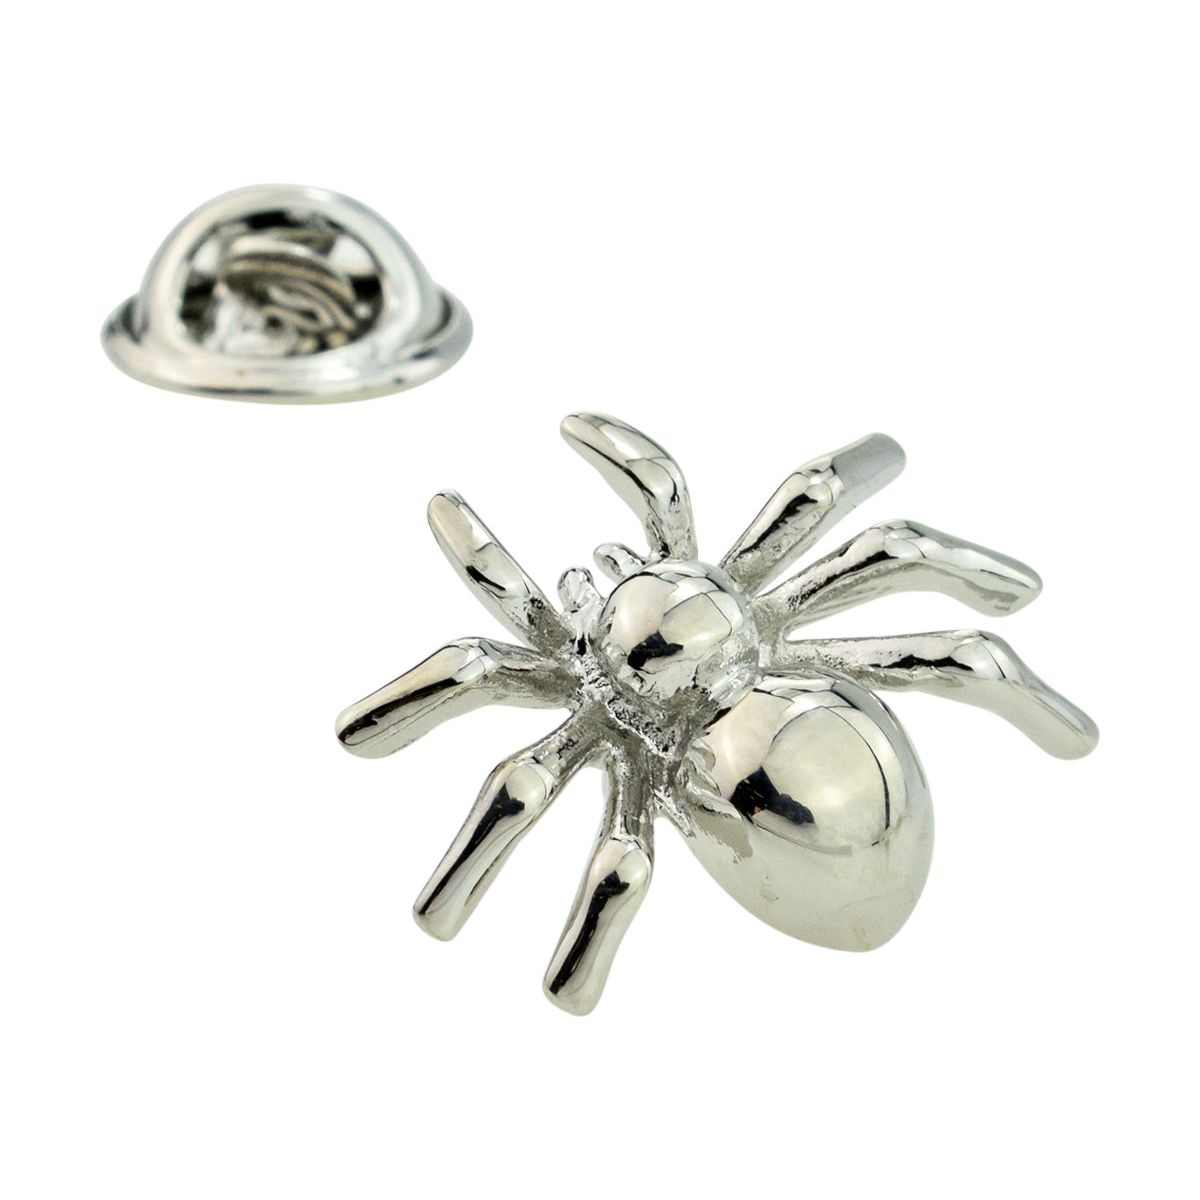 Metal Spider, Insect Lapel Pin badge - Ashton and Finch